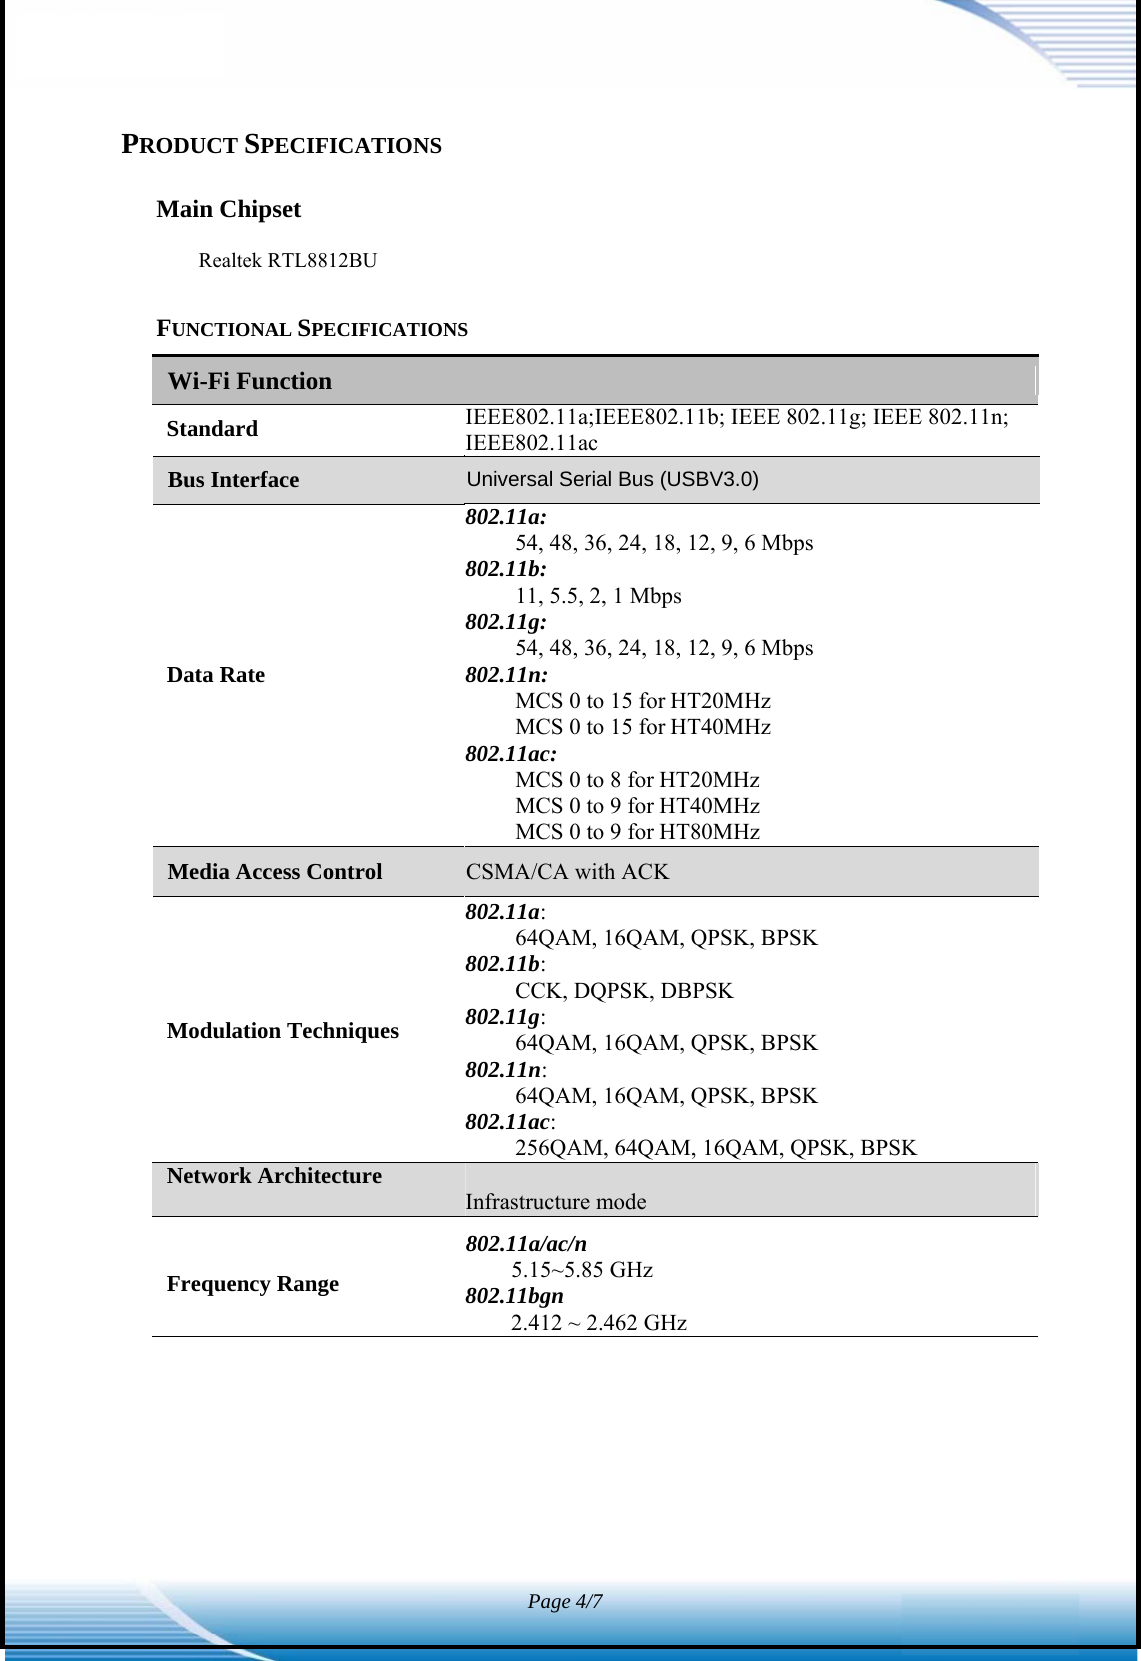 Infrastructure modeWi-Fi Function Page 4/7   PRODUCT SPECIFICATIONS  Main Chipset  Realtek RTL8812BU  FUNCTIONAL SPECIFICATIONS Standard  IEEE802.11a;IEEE802.11b; IEEE 802.11g; IEEE 802.11n; IEEE802.11ac       Data Rate 802.11a: 54, 48, 36, 24, 18, 12, 9, 6 Mbps 802.11b: 11, 5.5, 2, 1 Mbps 802.11g: 54, 48, 36, 24, 18, 12, 9, 6 Mbps 802.11n: MCS 0 to 15 for HT20MHz MCS 0 to 15 for HT40MHz 802.11ac: MCS 0 to 8 for HT20MHz MCS 0 to 9 for HT40MHz MCS 0 to 9 for HT80MHz      Modulation Techniques 802.11a: 64QAM, 16QAM, QPSK, BPSK 802.11b: CCK, DQPSK, DBPSK 802.11g: 64QAM, 16QAM, QPSK, BPSK 802.11n: 64QAM, 16QAM, QPSK, BPSK 802.11ac: 256QAM, 64QAM, 16QAM, QPSK, BPSK Network Architecture    802.11a/ac/n Frequency Range  5.15~5.85 GHz 802.11bgn 2.412 ~ 2.462 GHz                            Media Access Control  CSMA/CA with ACK Bus Interface  Universal Serial Bus (USBV3.0)   